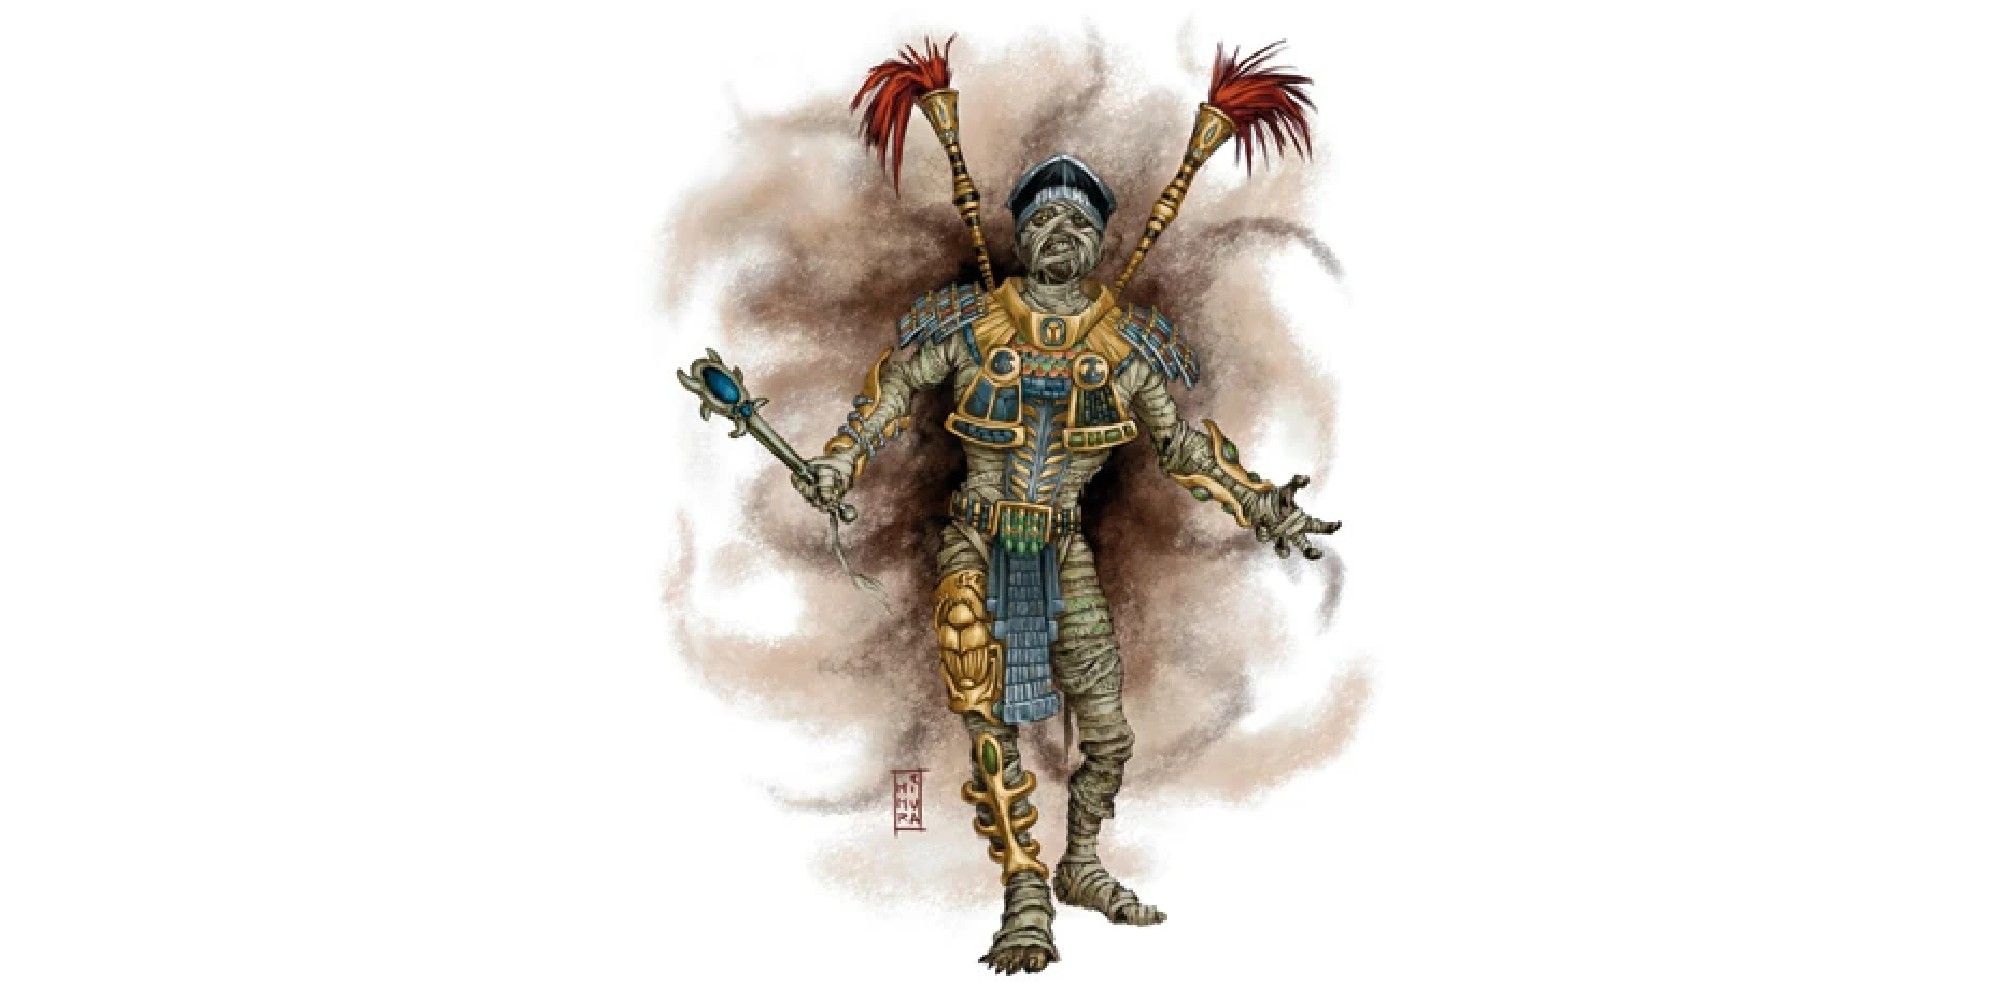 Dungeons & Dragons: An Undead Pharoh 